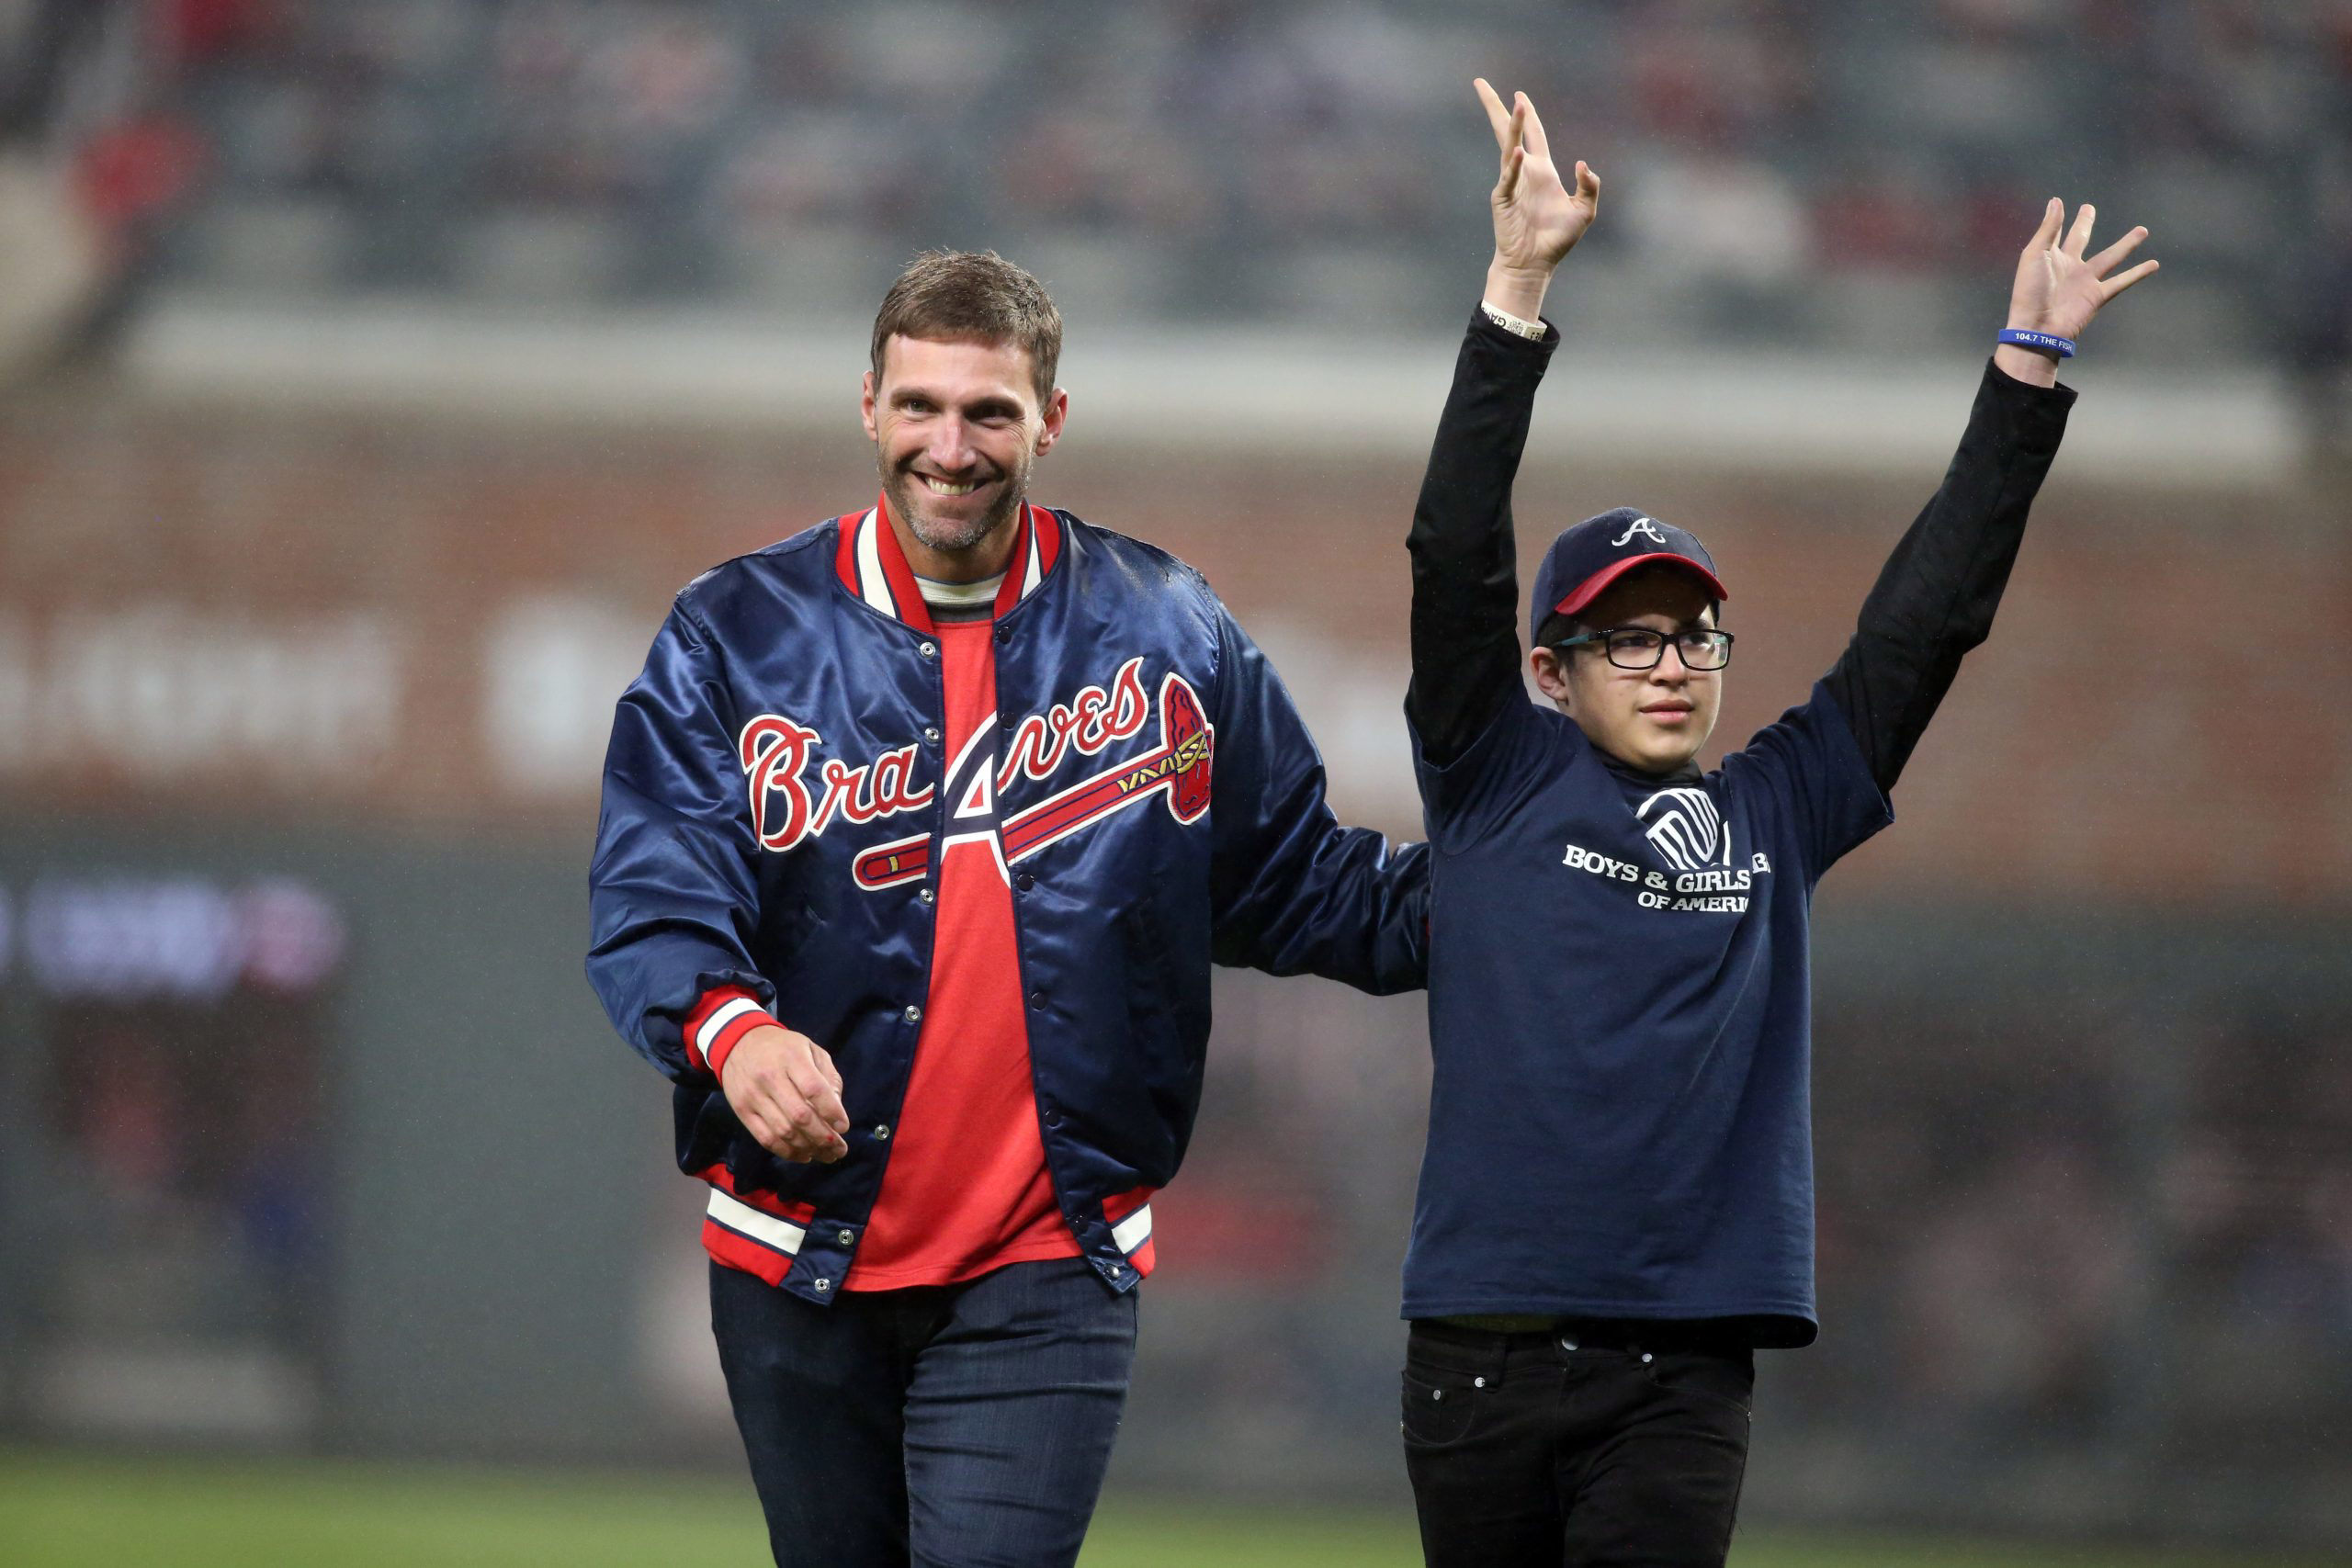 Braves announcer implores team to be tougher